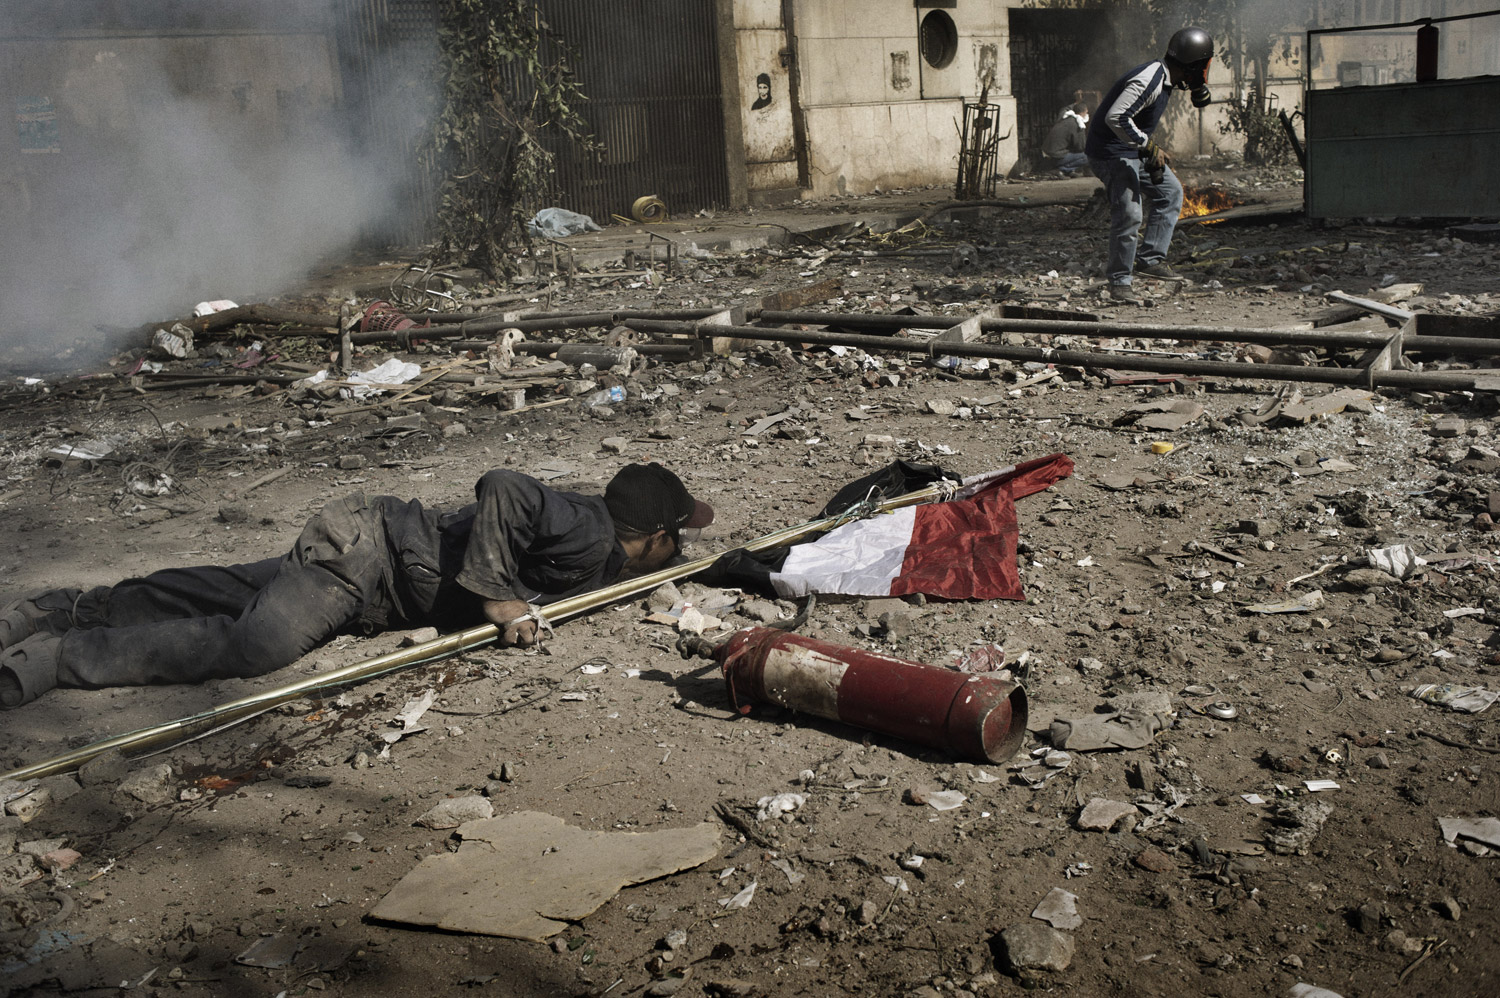 A protester crouches for cover during clashes with Egyptian security forces, November 23, 2011.